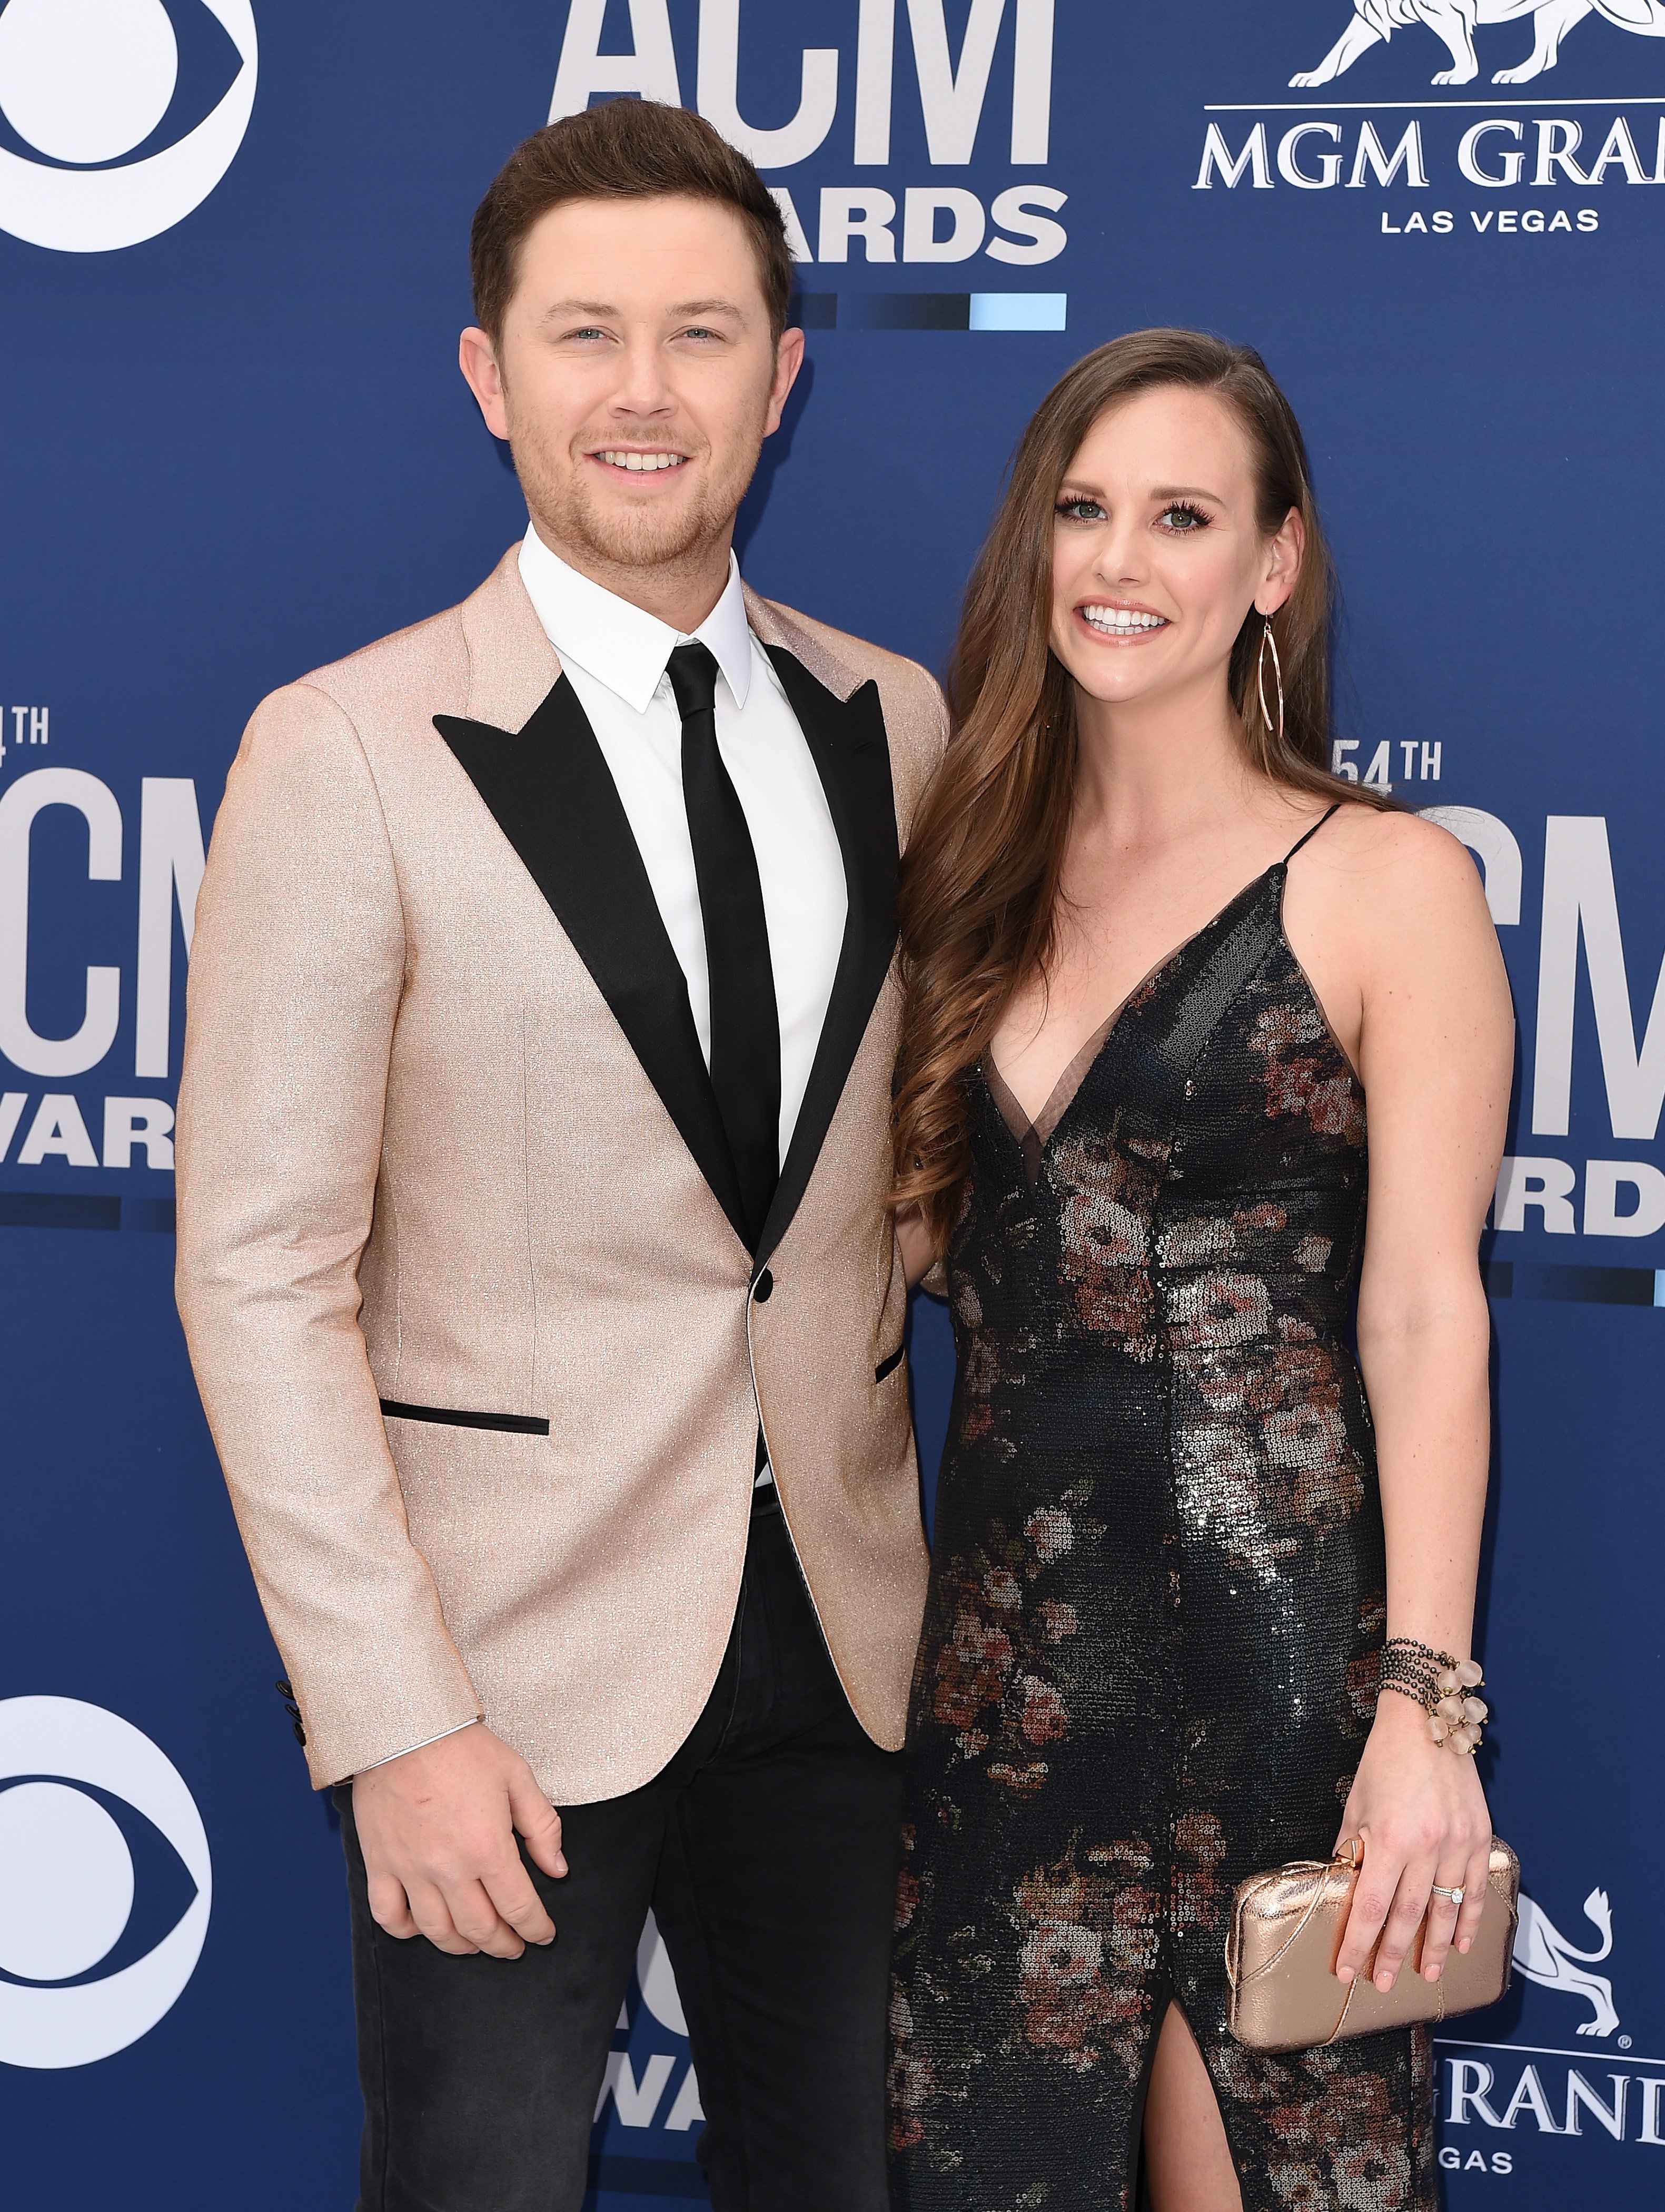 Scotty McCreery and Gabi Dugal attend the 54th Academy of Country Music Awards at MGM Grand Garden Arena on April 07, 2019 in Las Vegas, Nevada. | Source: Getty Images